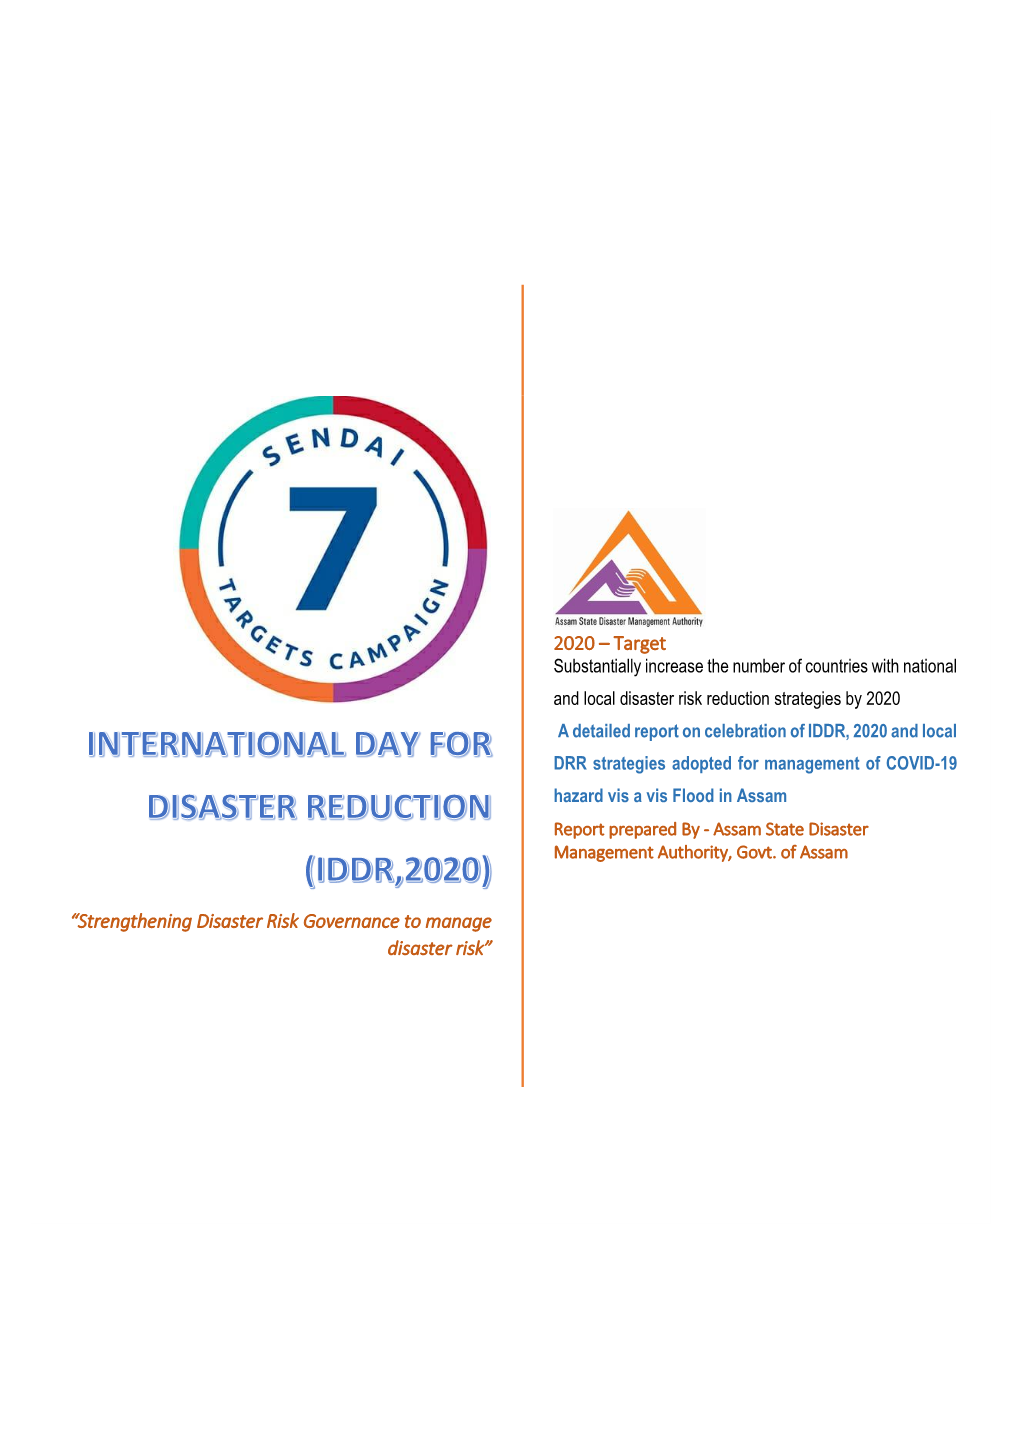 International Day for Disaster Reduction (Iddr,2020)